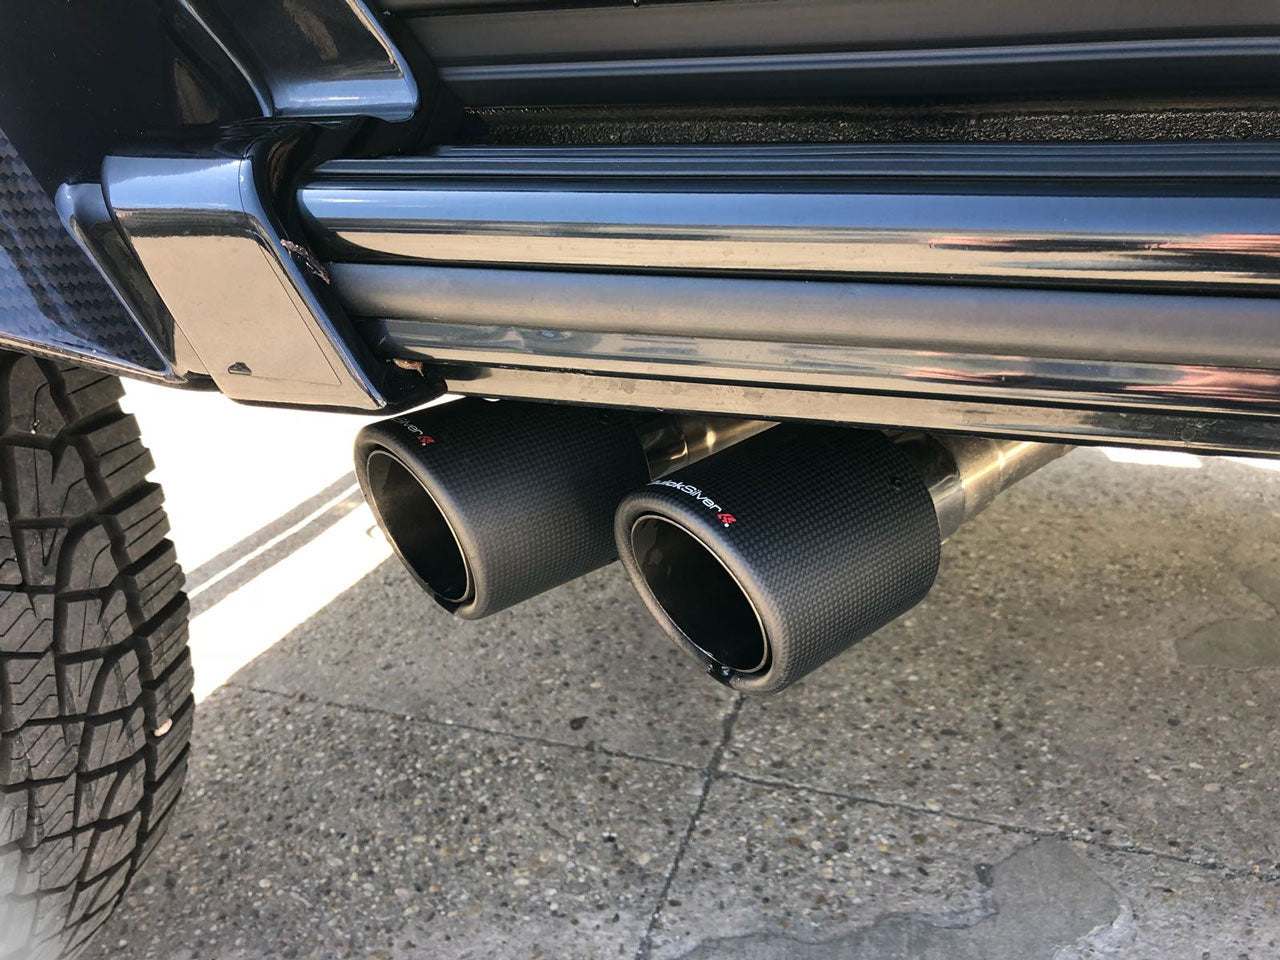 Mercedes AMG G 500 / G 550 4x4² 4.0 Biturbo (W463) - Sport Exhaust with Sound Architect™ (2017 on) - QuickSilver Exhausts